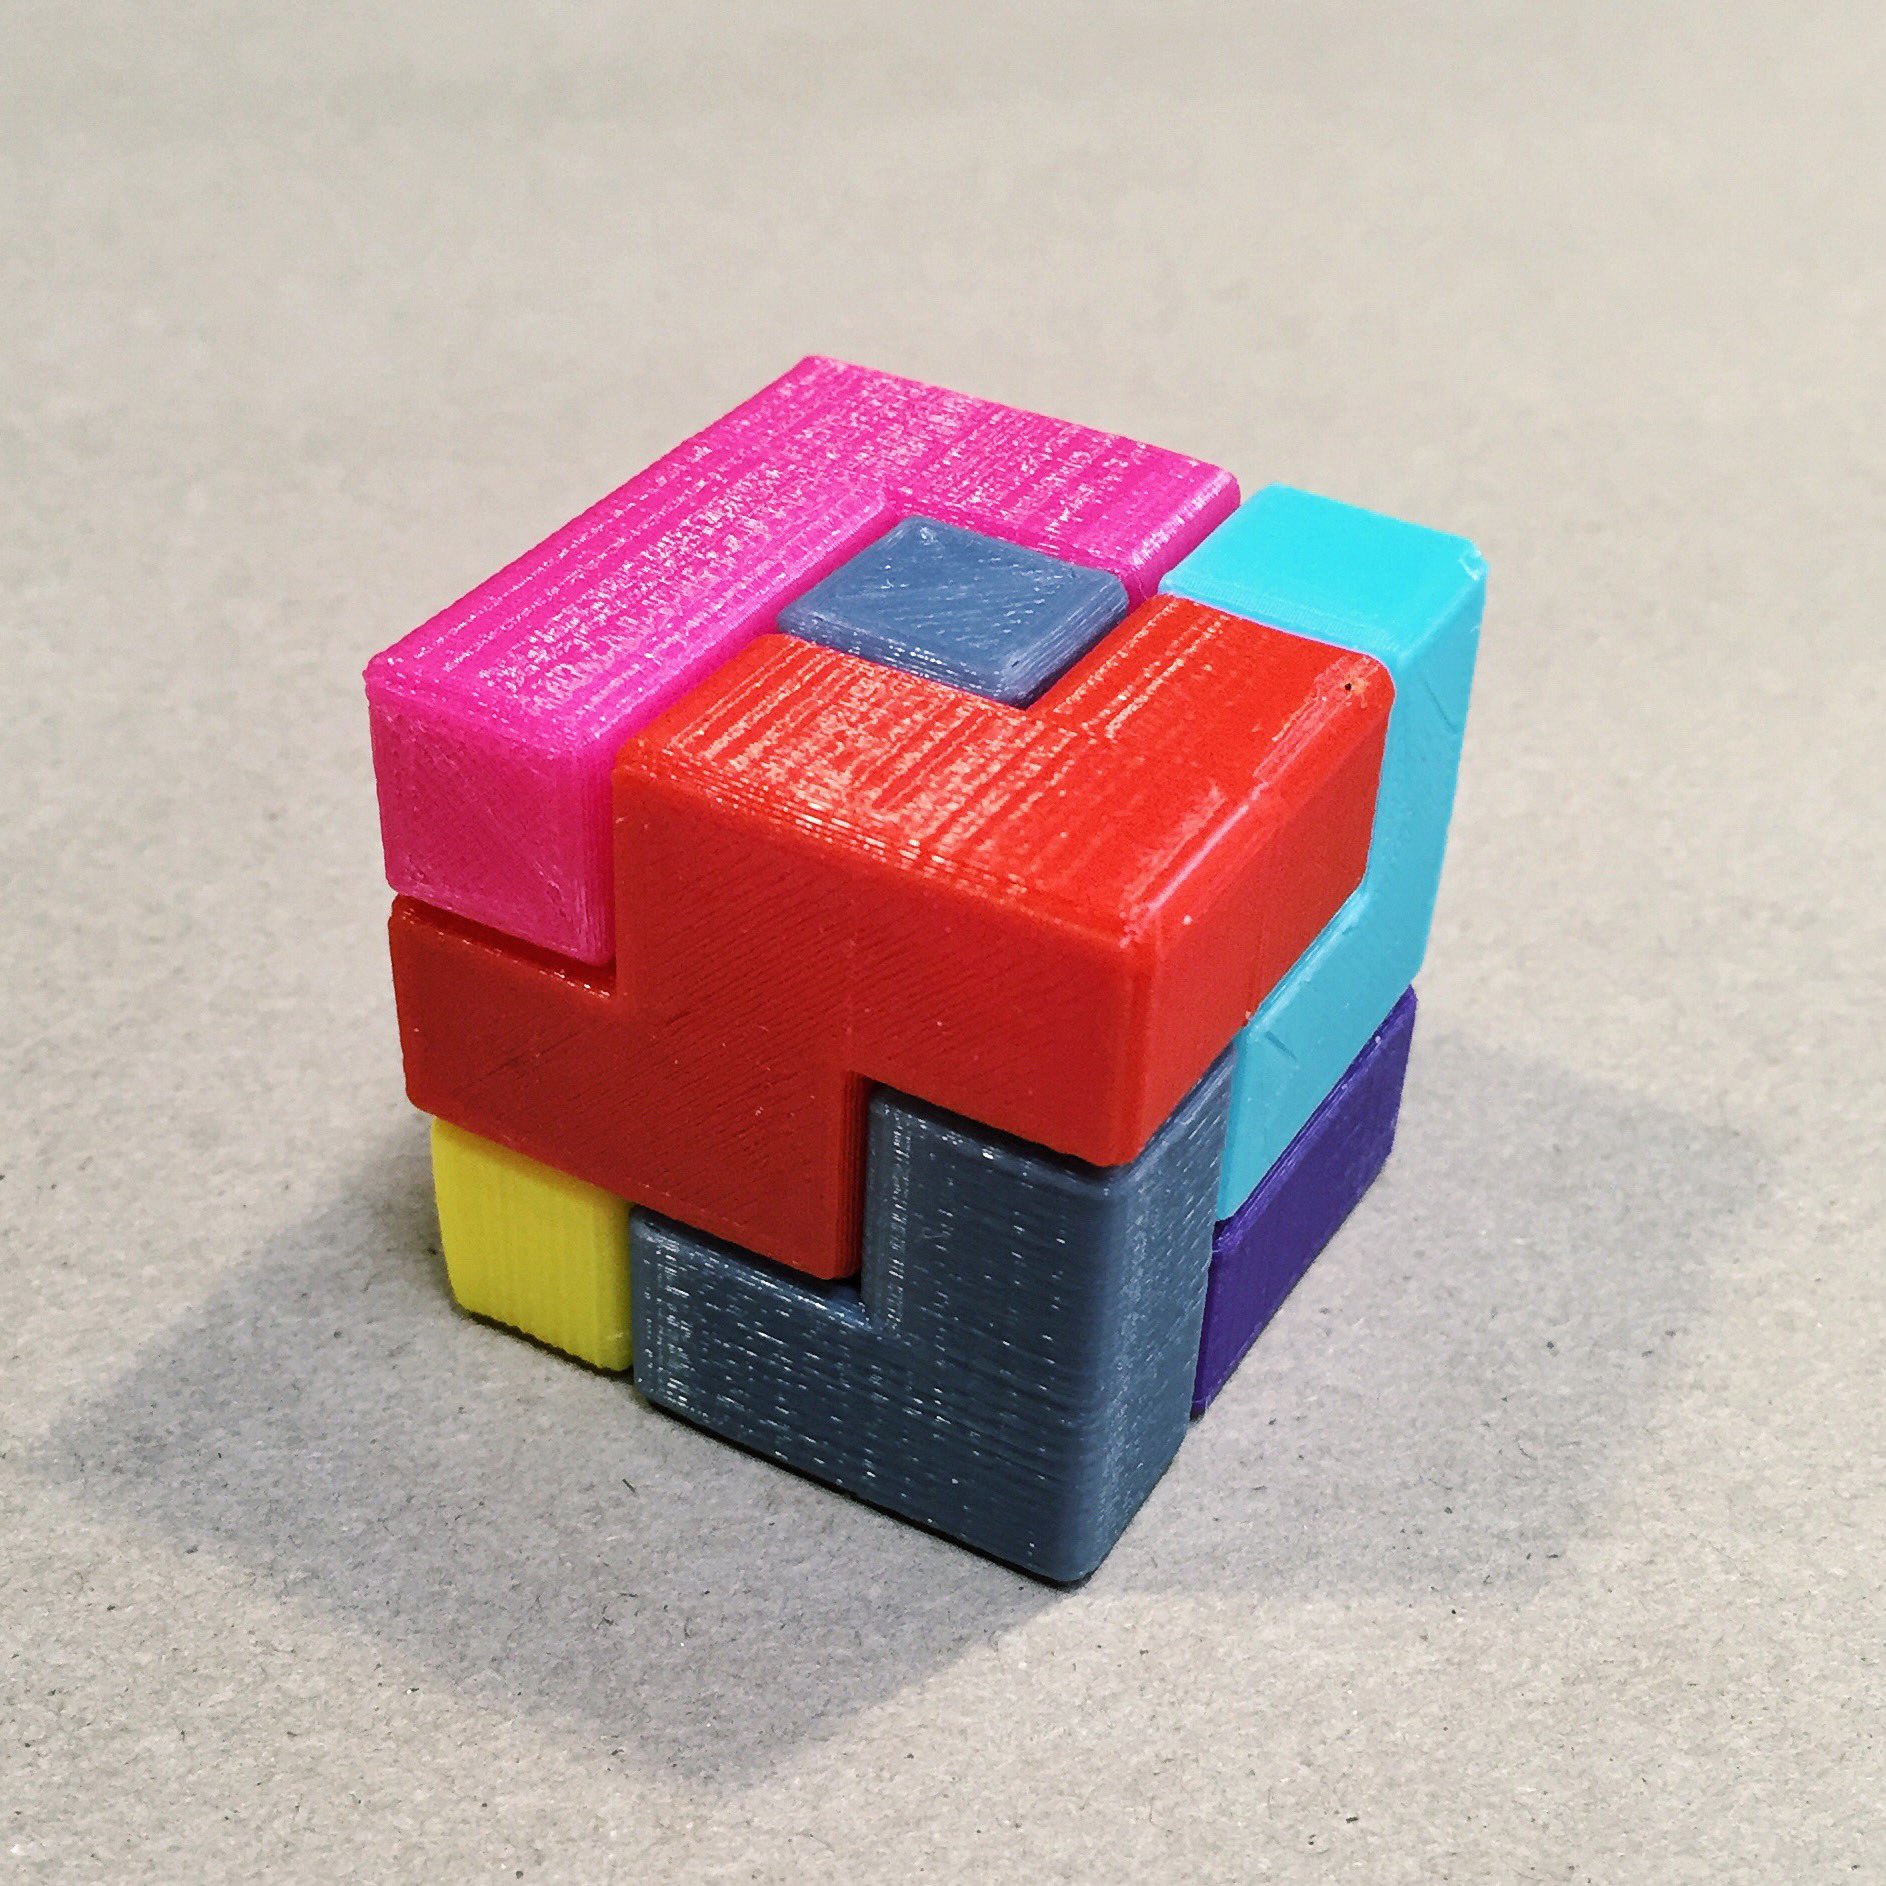 New Matter on Twitter "3D print out this 3x3 puzzle cube for a fun